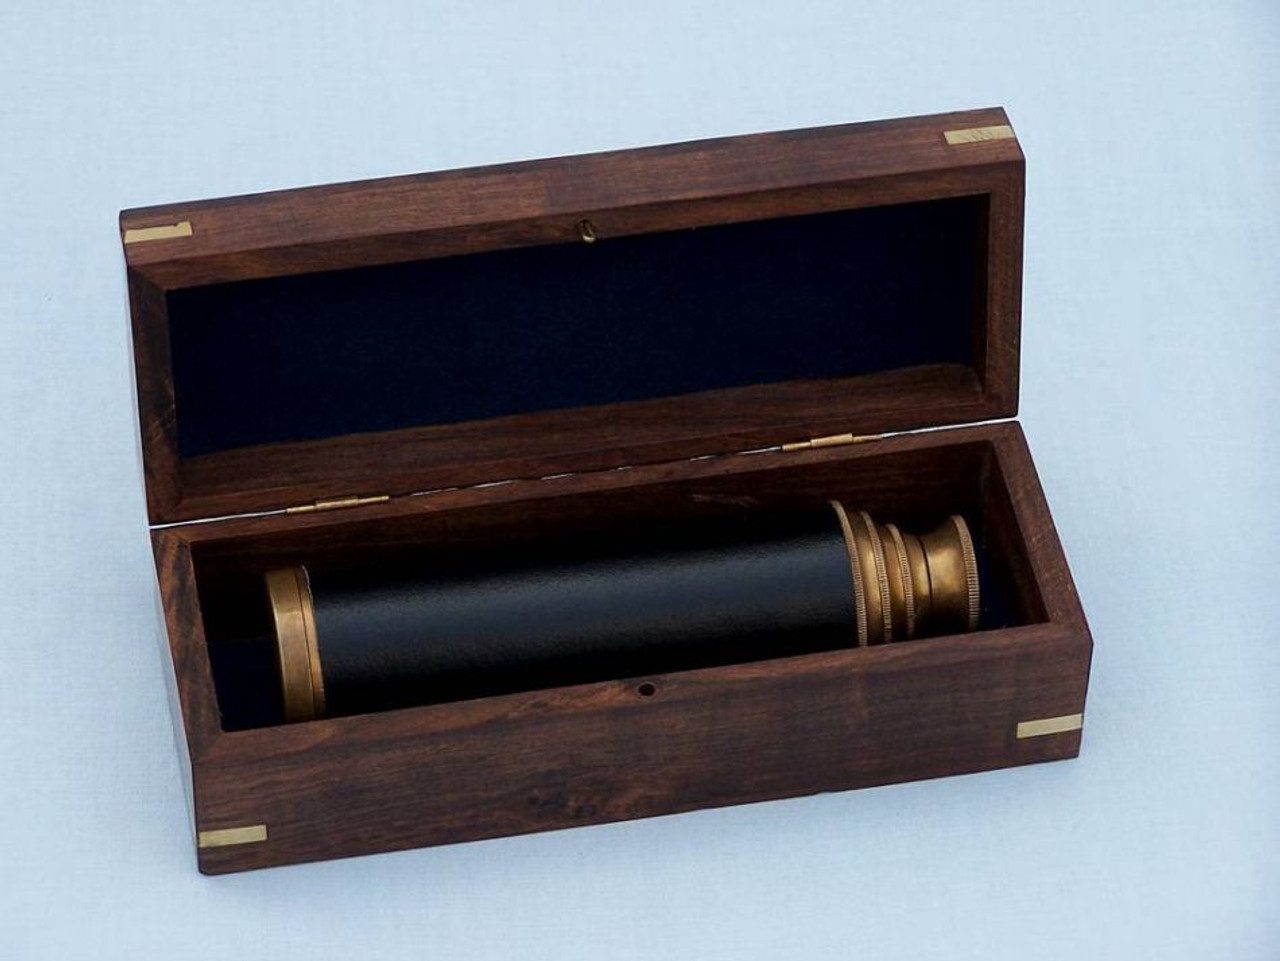 Deluxe Class Antique Brass Captains Spyglass Telescope with Leather 15" and Rosewood Box